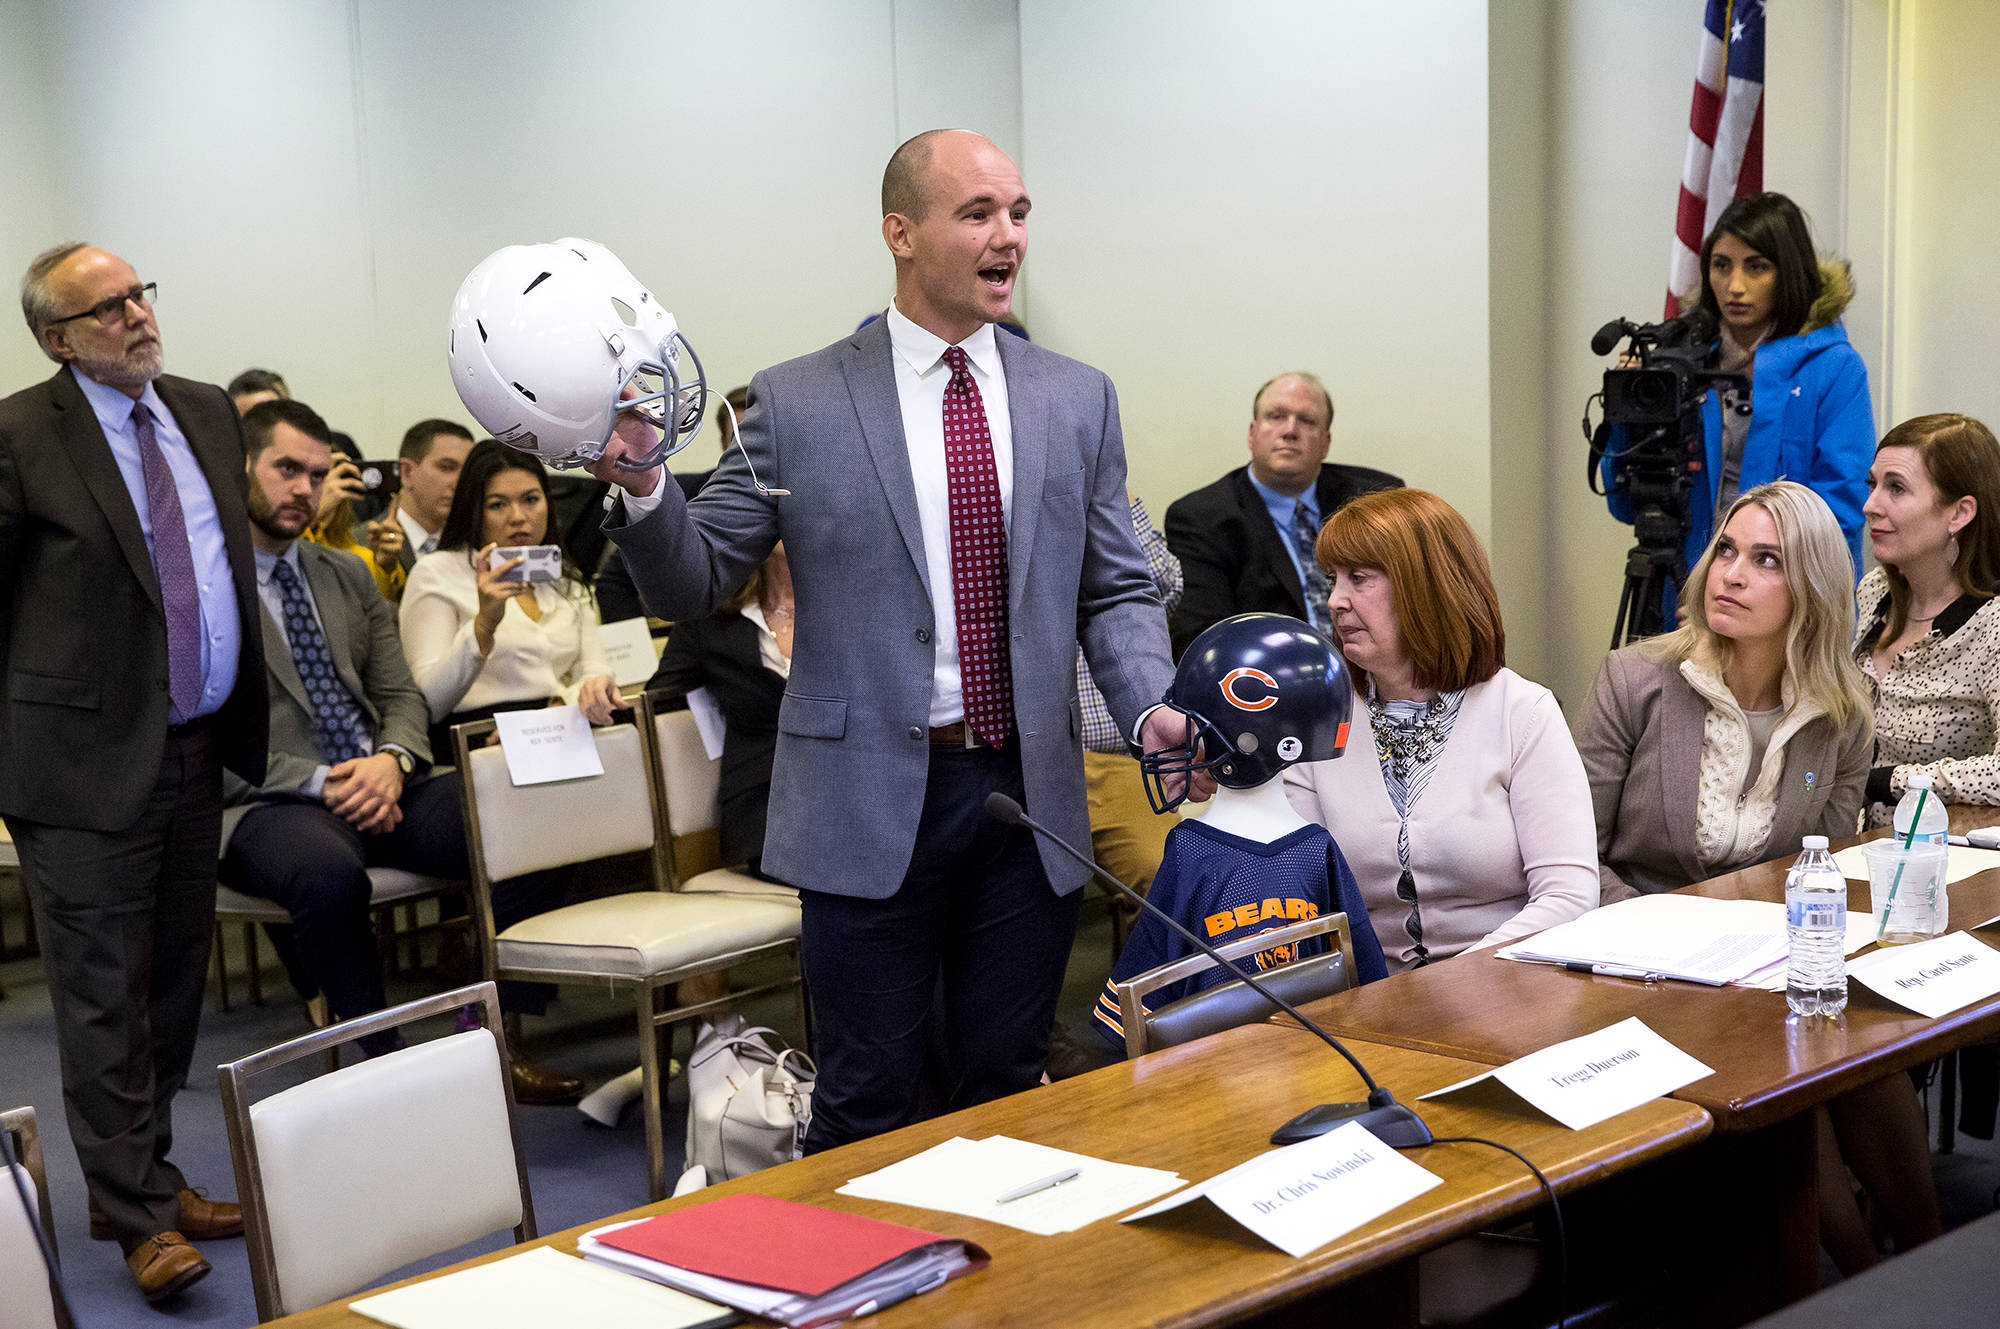 FILE - In this March 1, 2018, file photo, Chris Borland, a former NFL linebacker and Big Ten Defensive Player of the Year for the University of Wisconsin, testifies before a Illinois House Mental Health Committee hearing in Springfield, Ill., on House Bill 4341, which would ban tackle football for kids under 12 years of age. (Rich Saal//The State Journal-Register via AP, File)